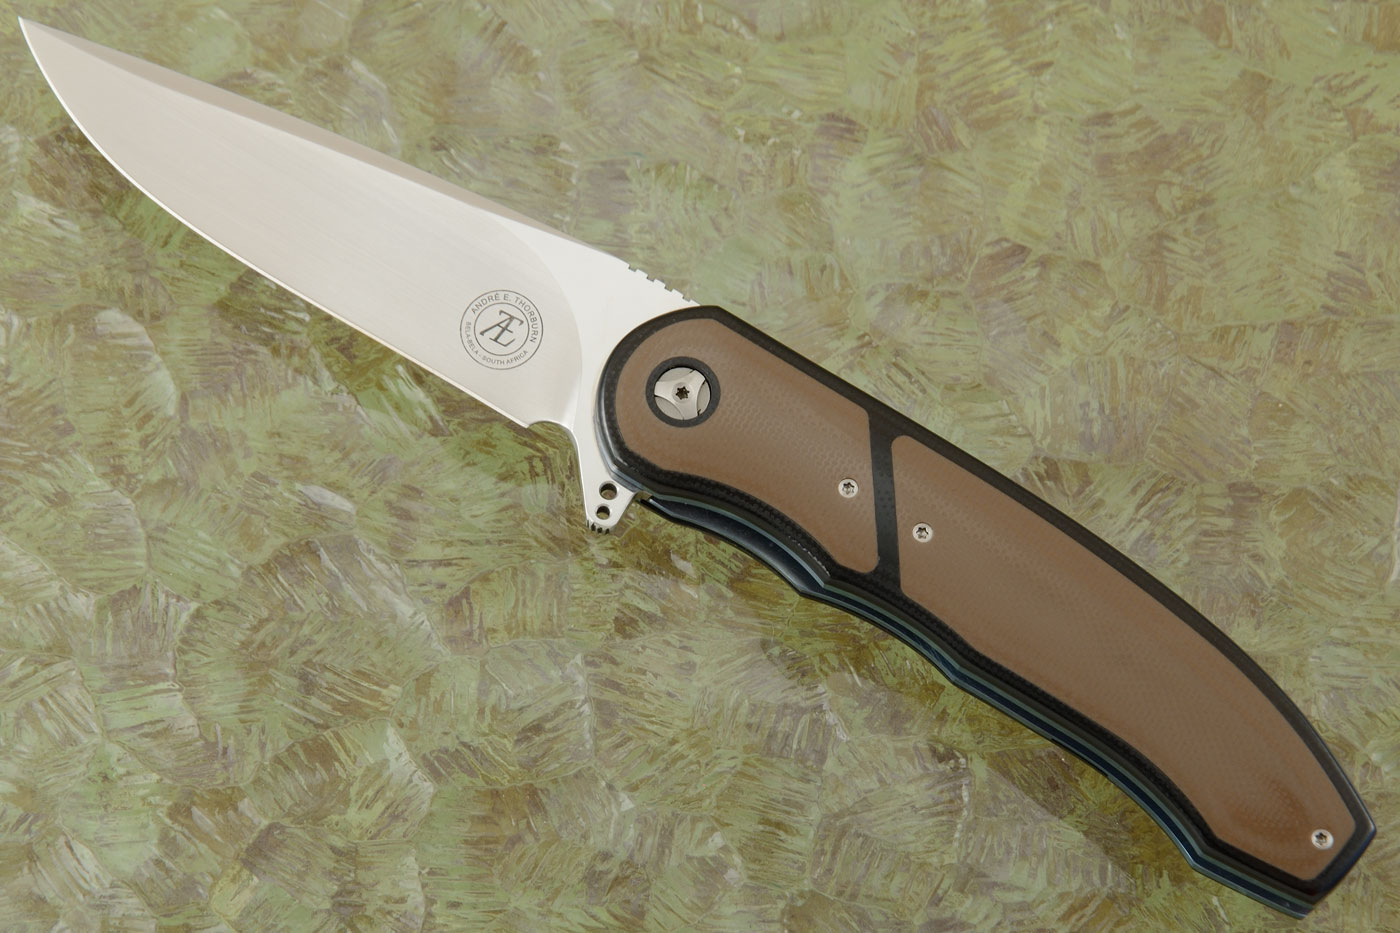 L48 Flipper with Black and Earth Brown G-10 (IKBS)